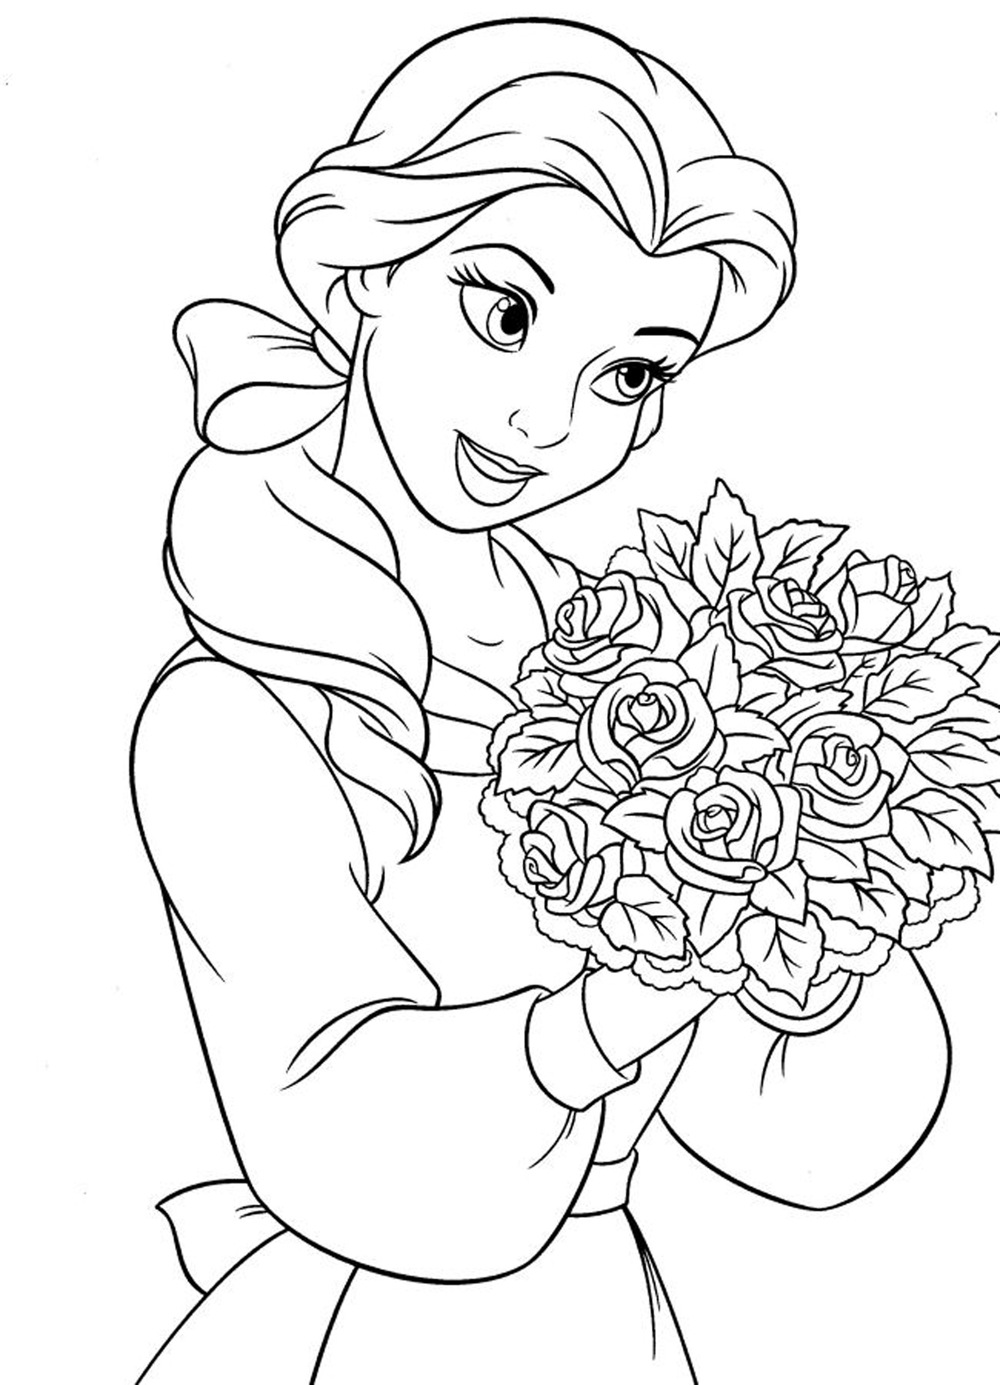 11++ Free disney coloring pages to print info